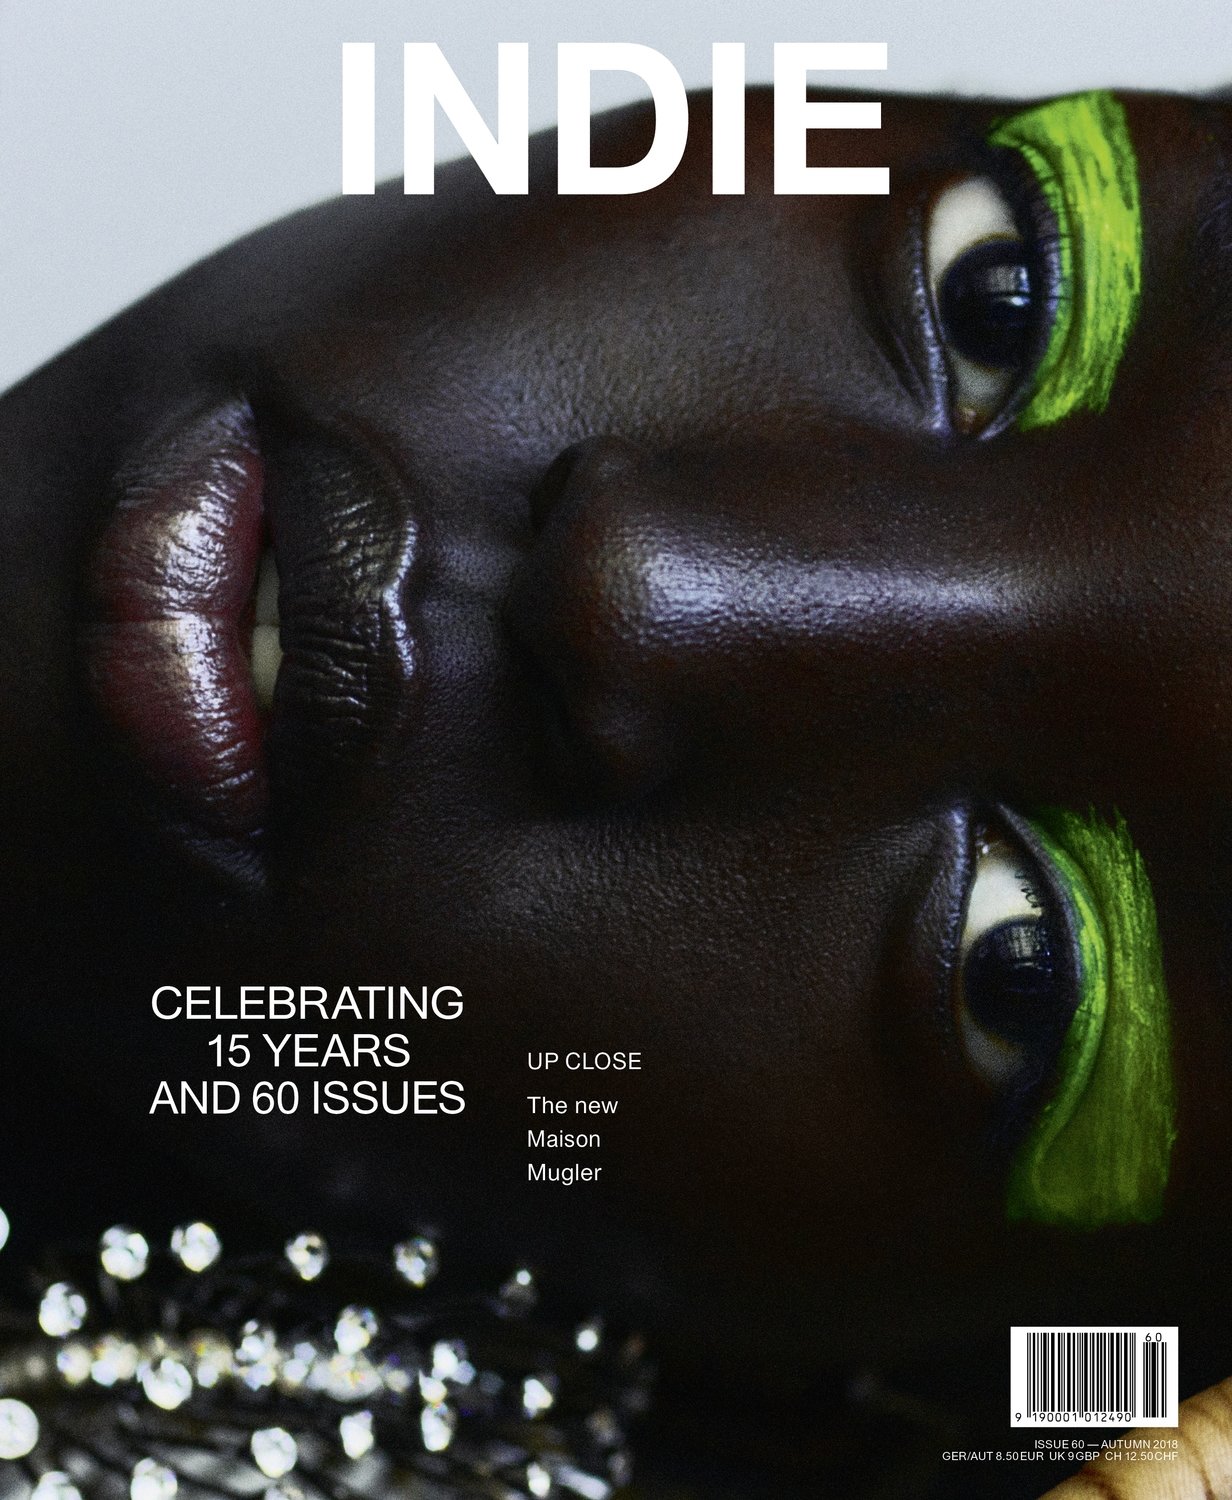 INDIE #60 - The Big 15 Years Anniversary Issue - Cover 1